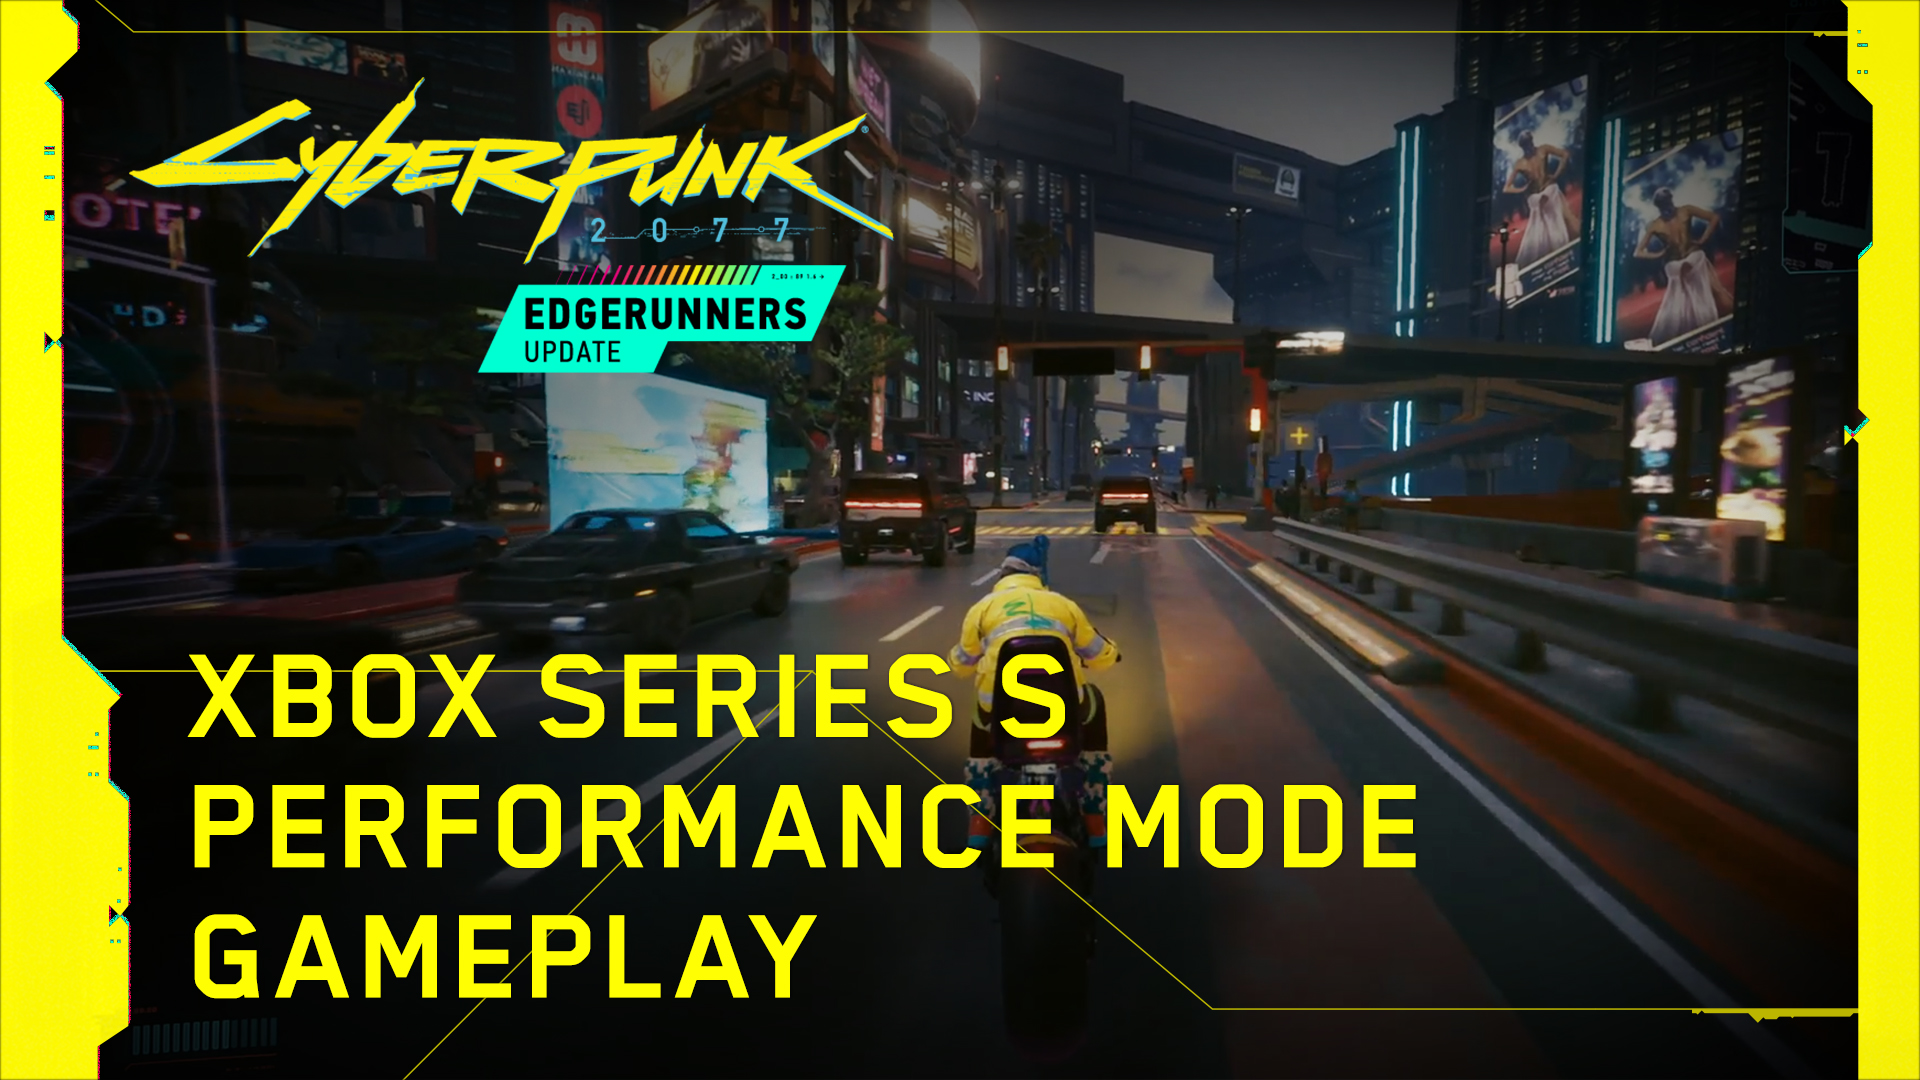 Cyberpunk 2077 on Twitter: "Pretty cool, isn't it? Take a look at the Xbox  Series S performance mode video – our newest addition for the console users  and all the smooth framerate